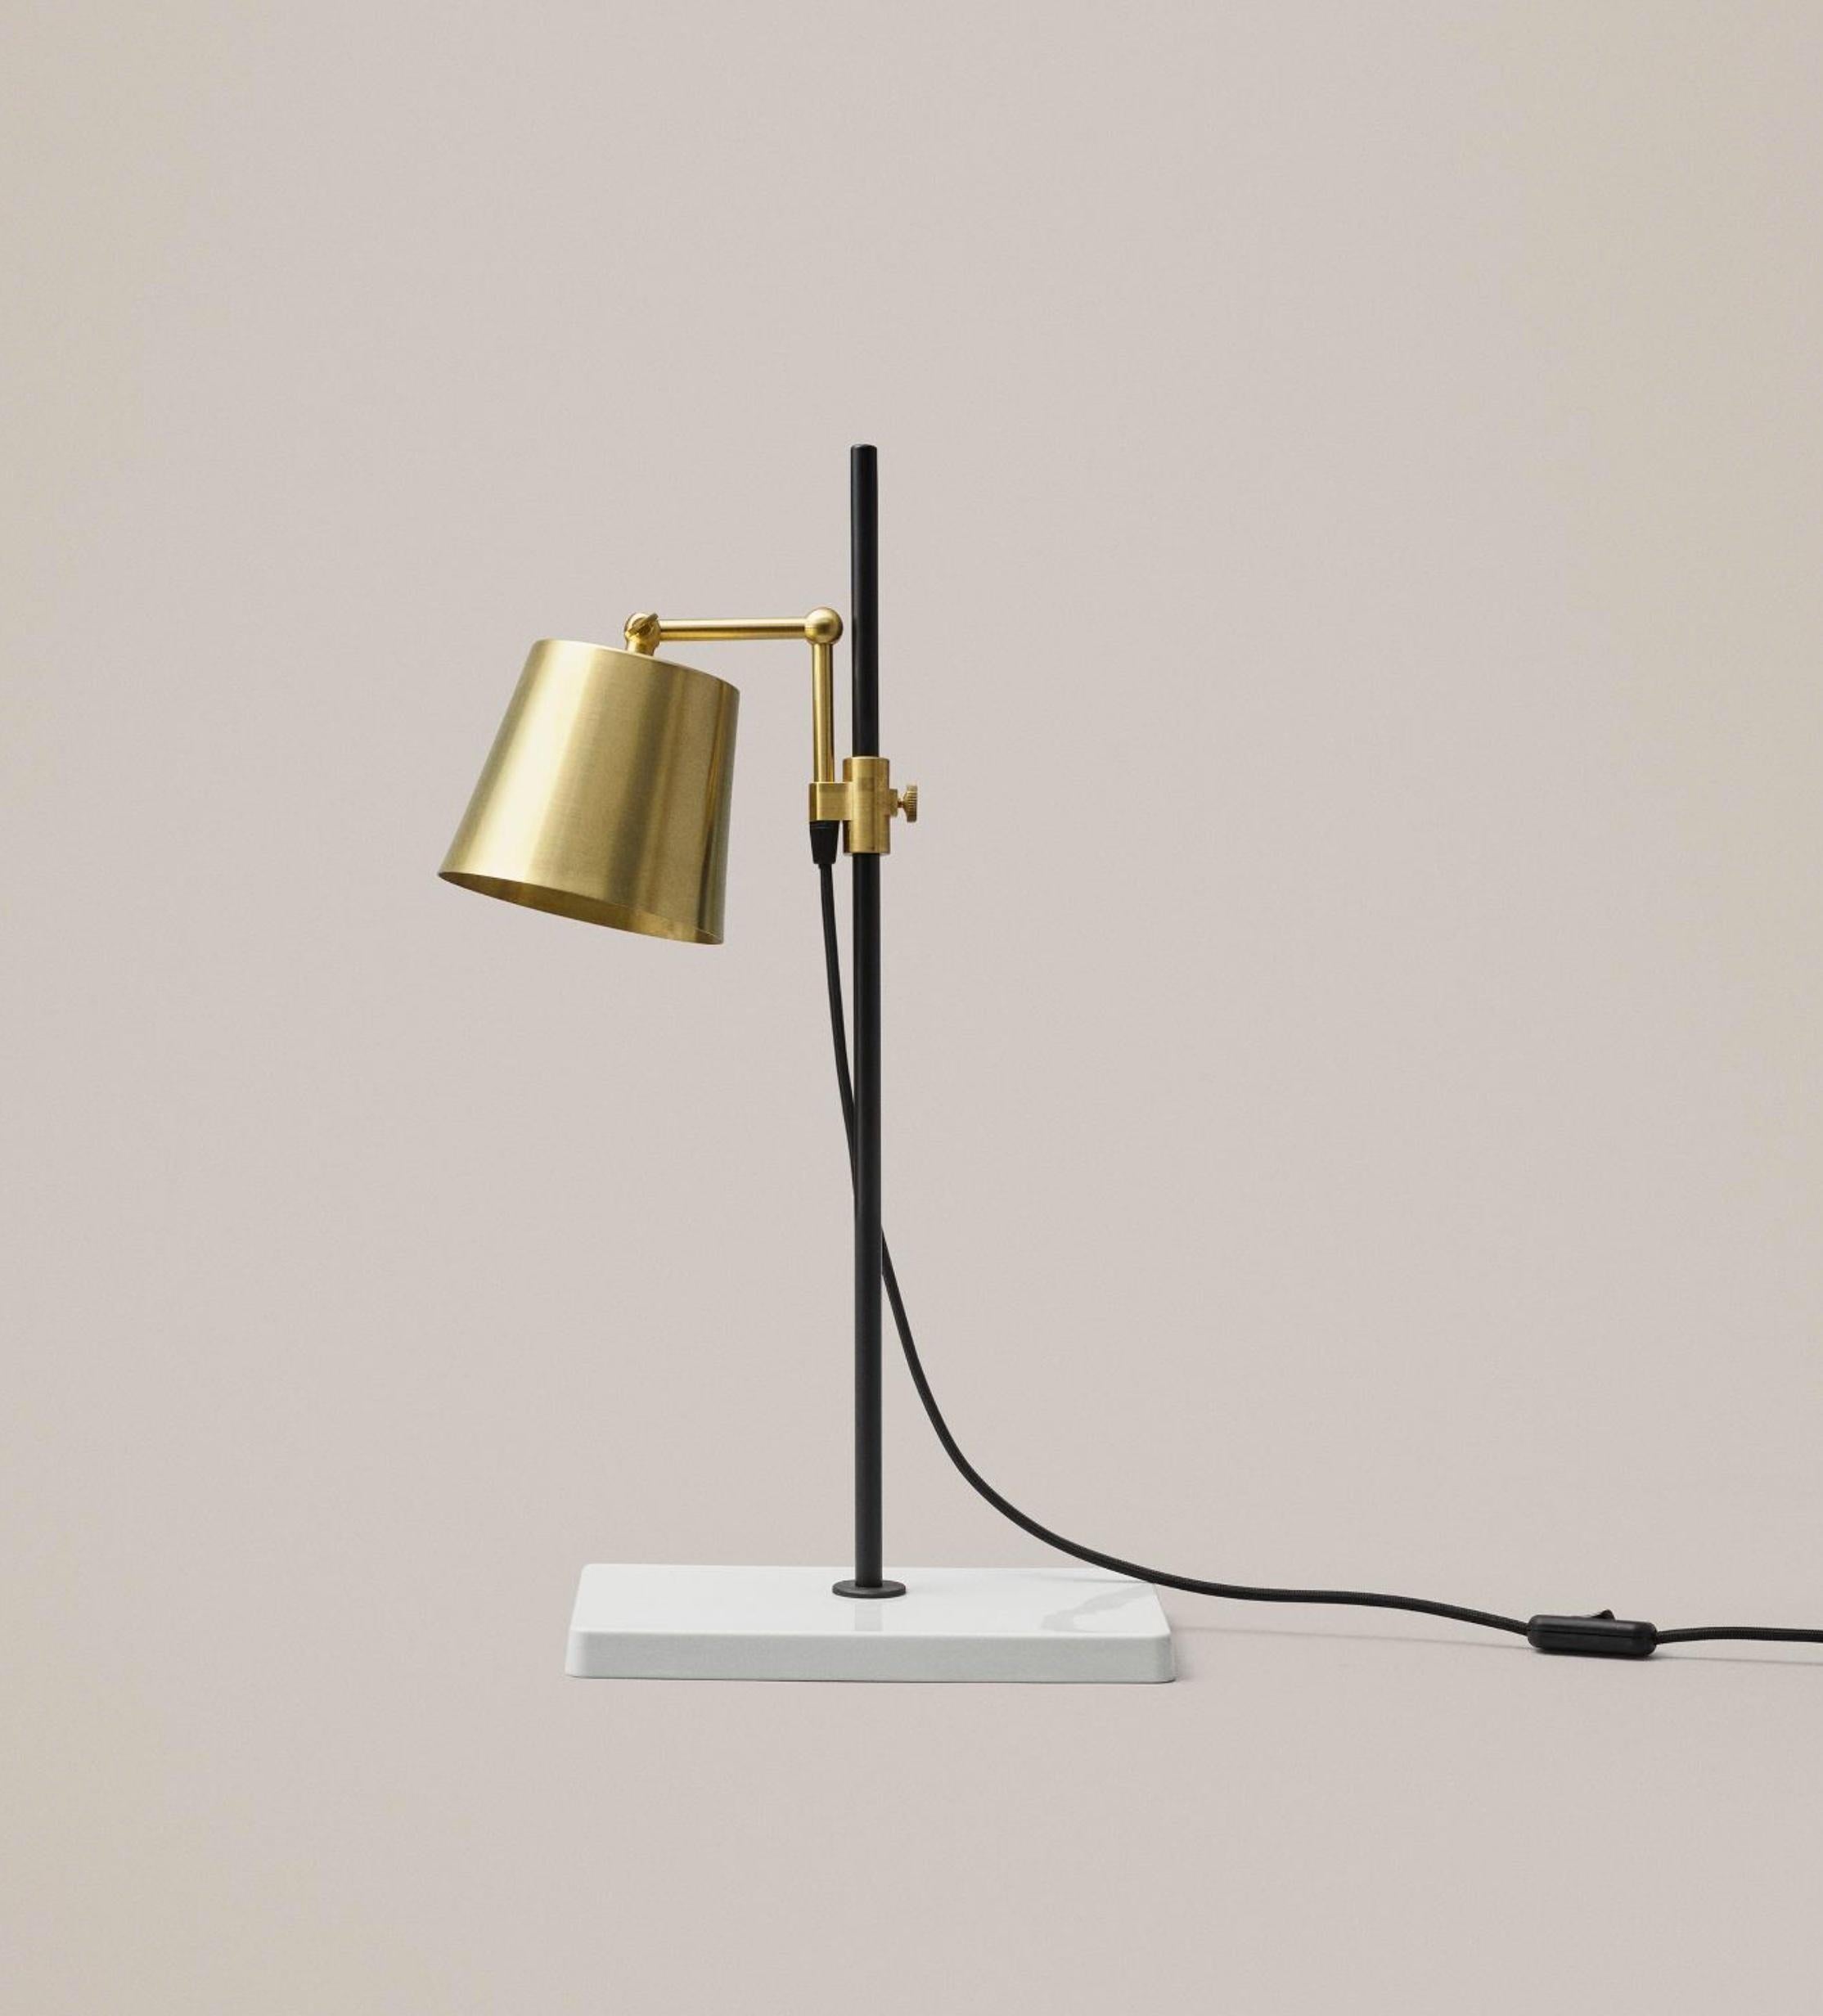 The lab light design came about from a genuine fascination with laboratory equipment and with all those fantastic clamps and levers — the perfect place to start designing a multi-functional lamp.

The base is porcelain, the stem is painted steel,